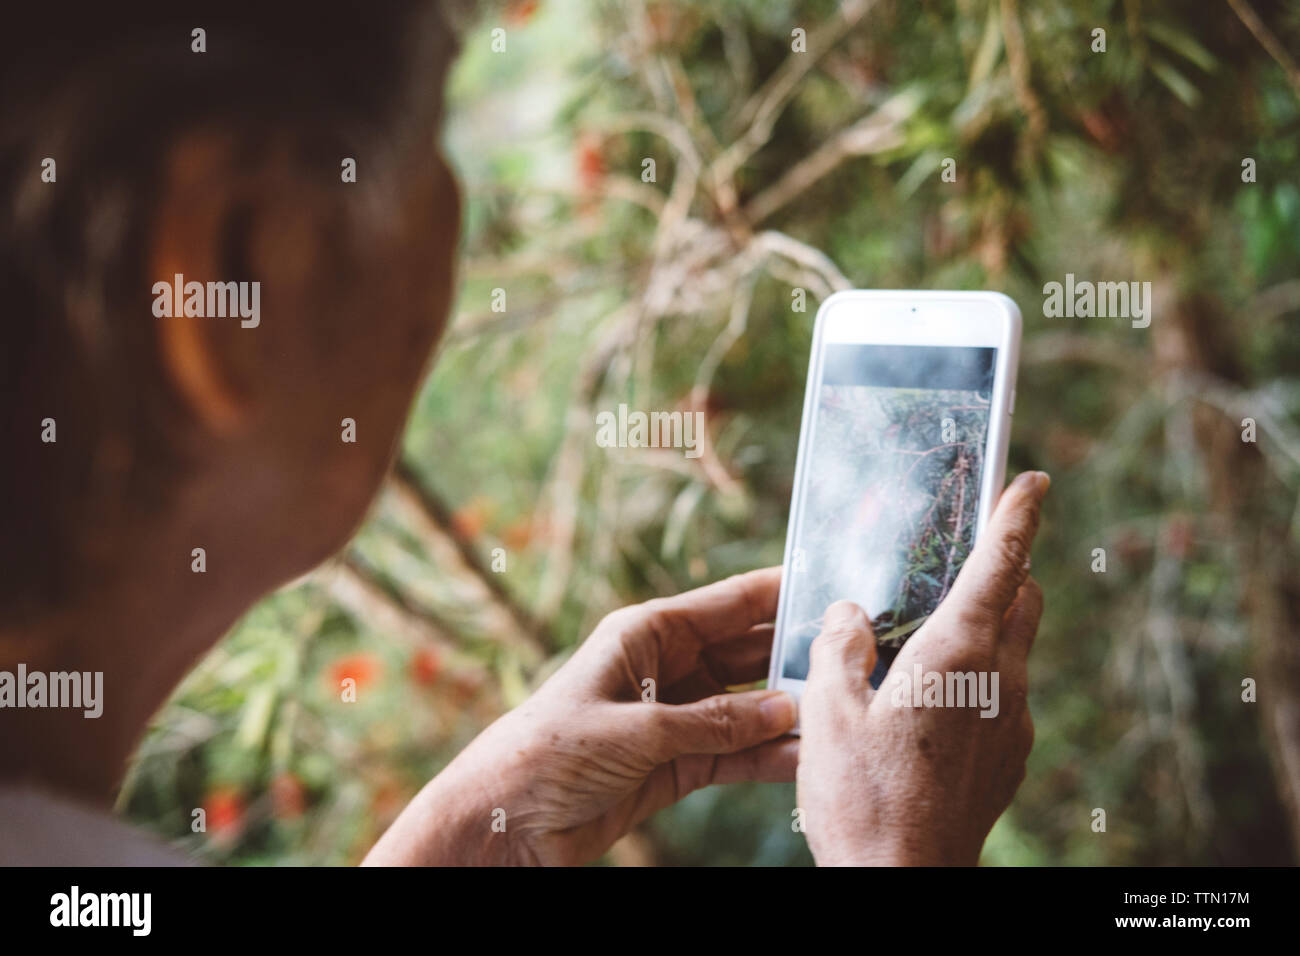 Close-up of woman photographing plants with mobile phone in yard Stock Photo